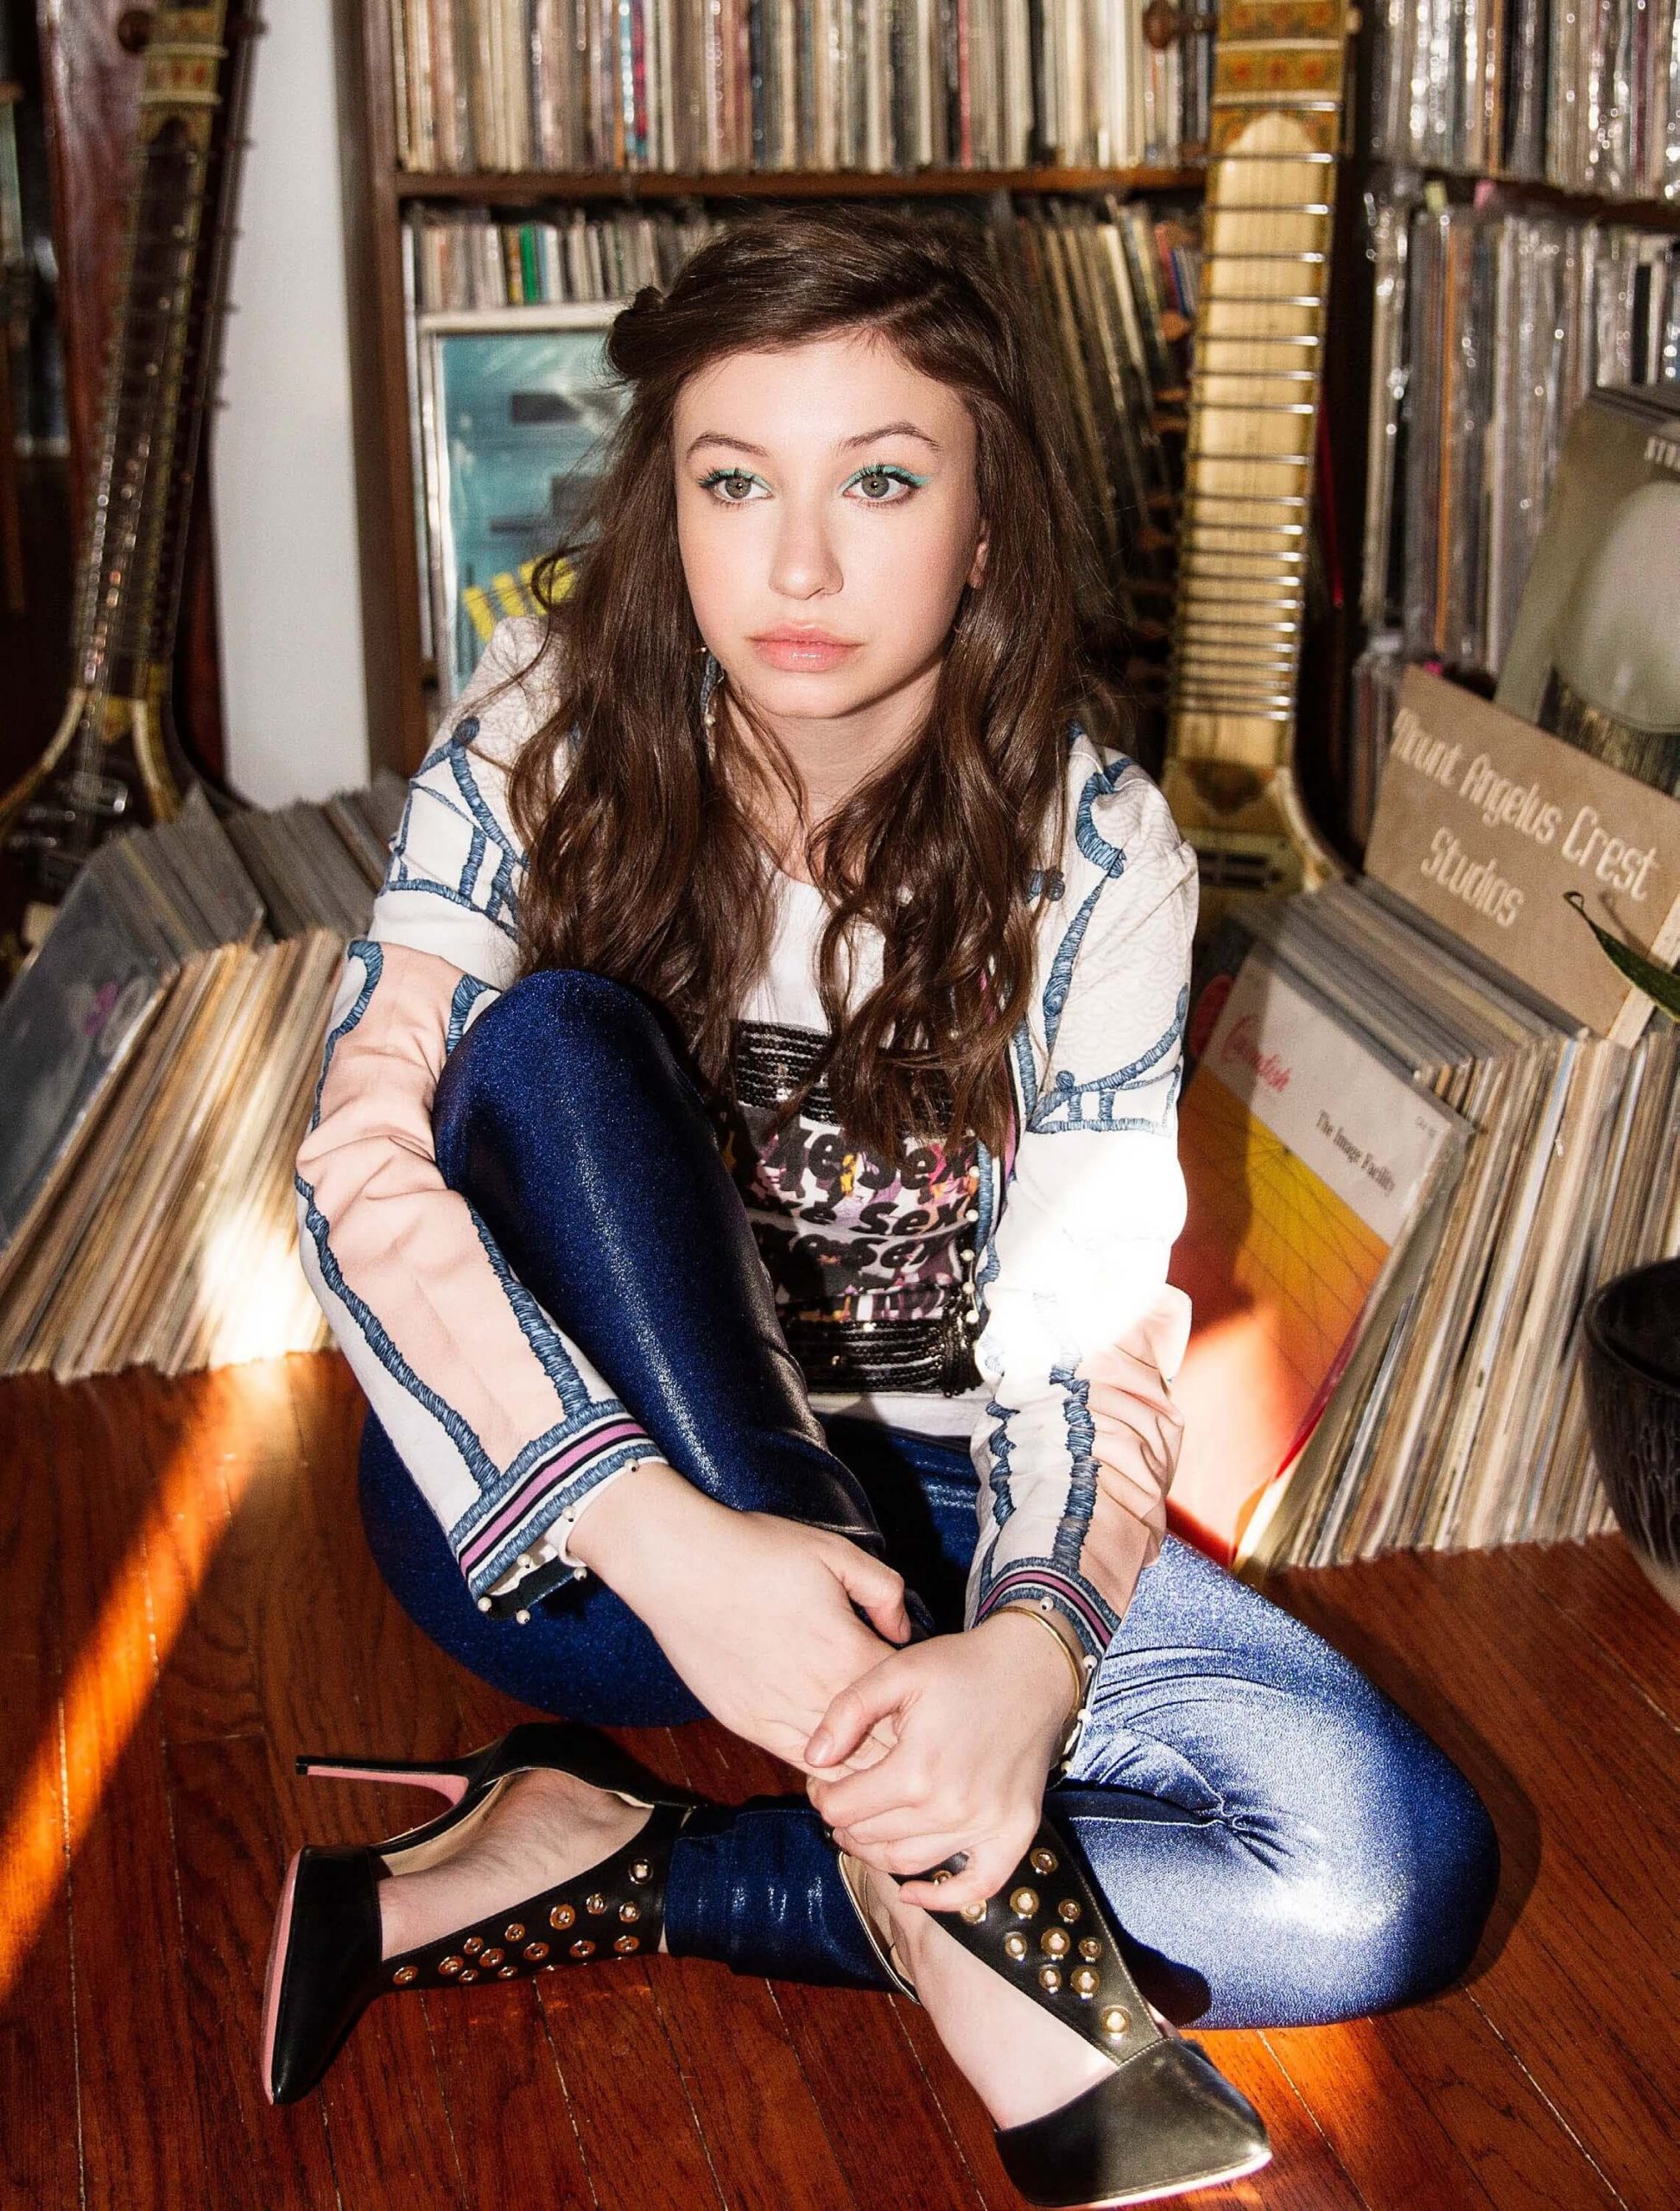 50 Katelyn Nacon Nude Pictures Which Prove Beauty Beyond Recognition 16